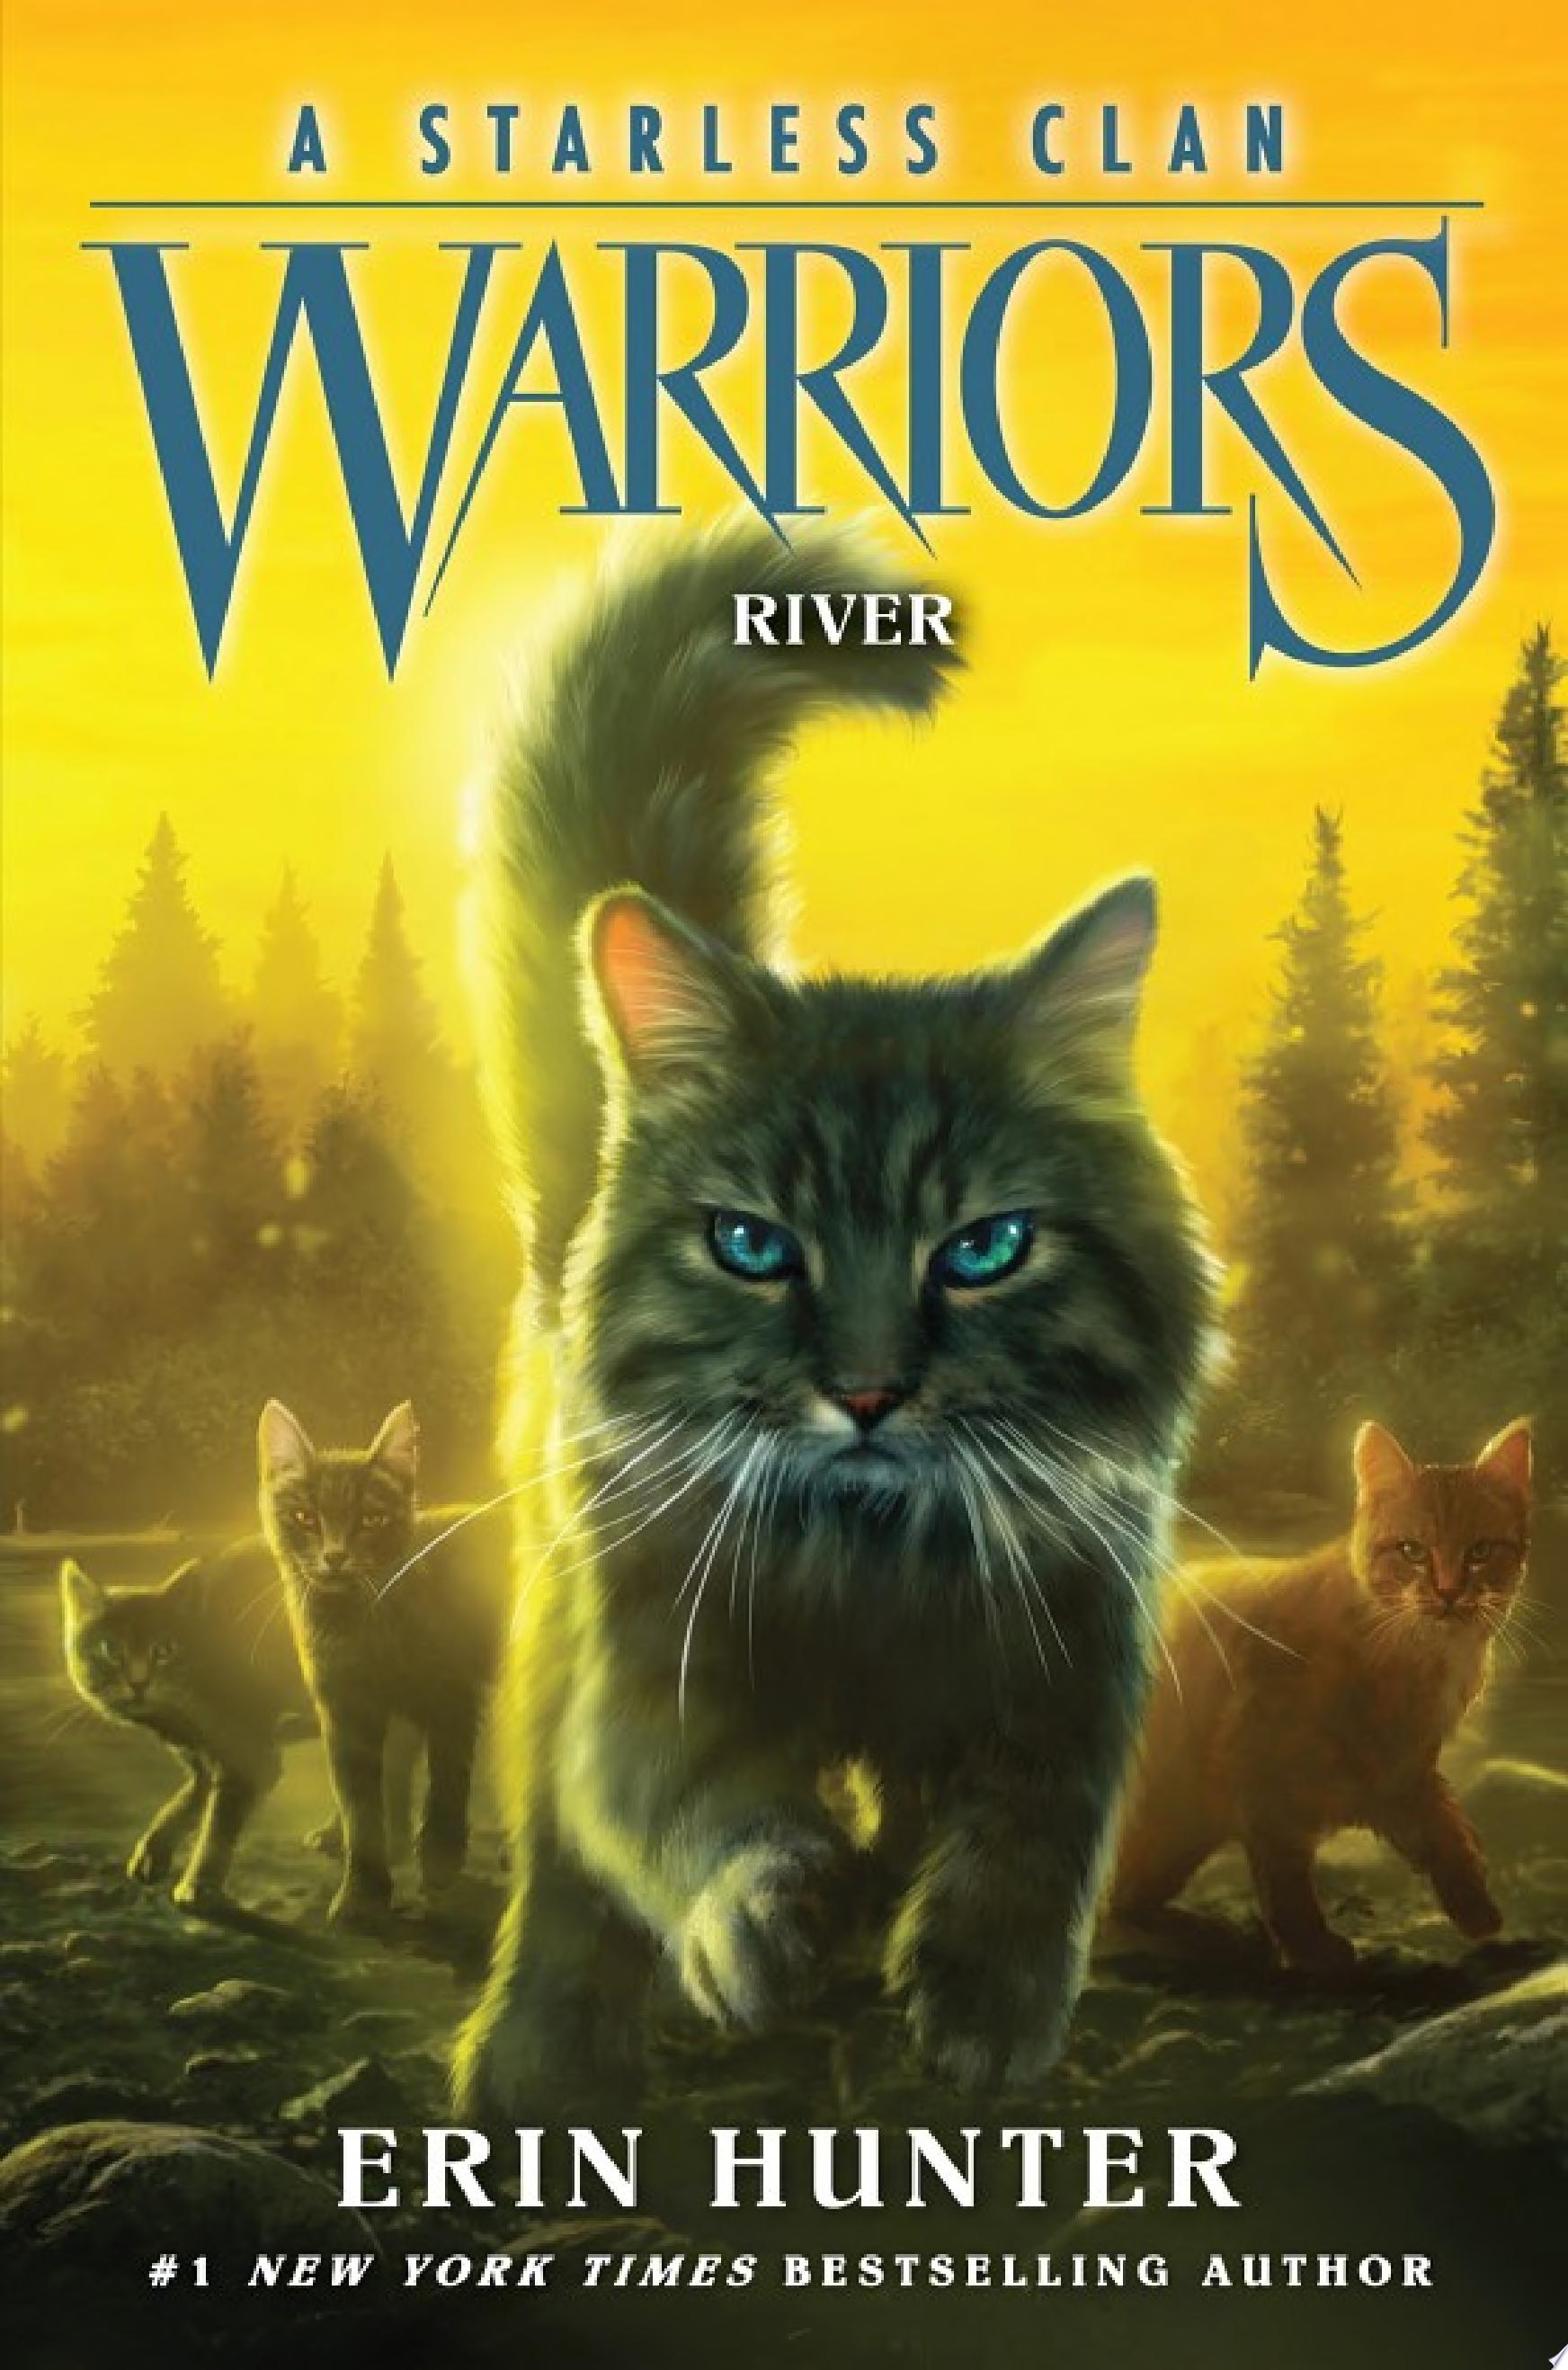 Image for "Warriors: A Starless Clan #1: River"